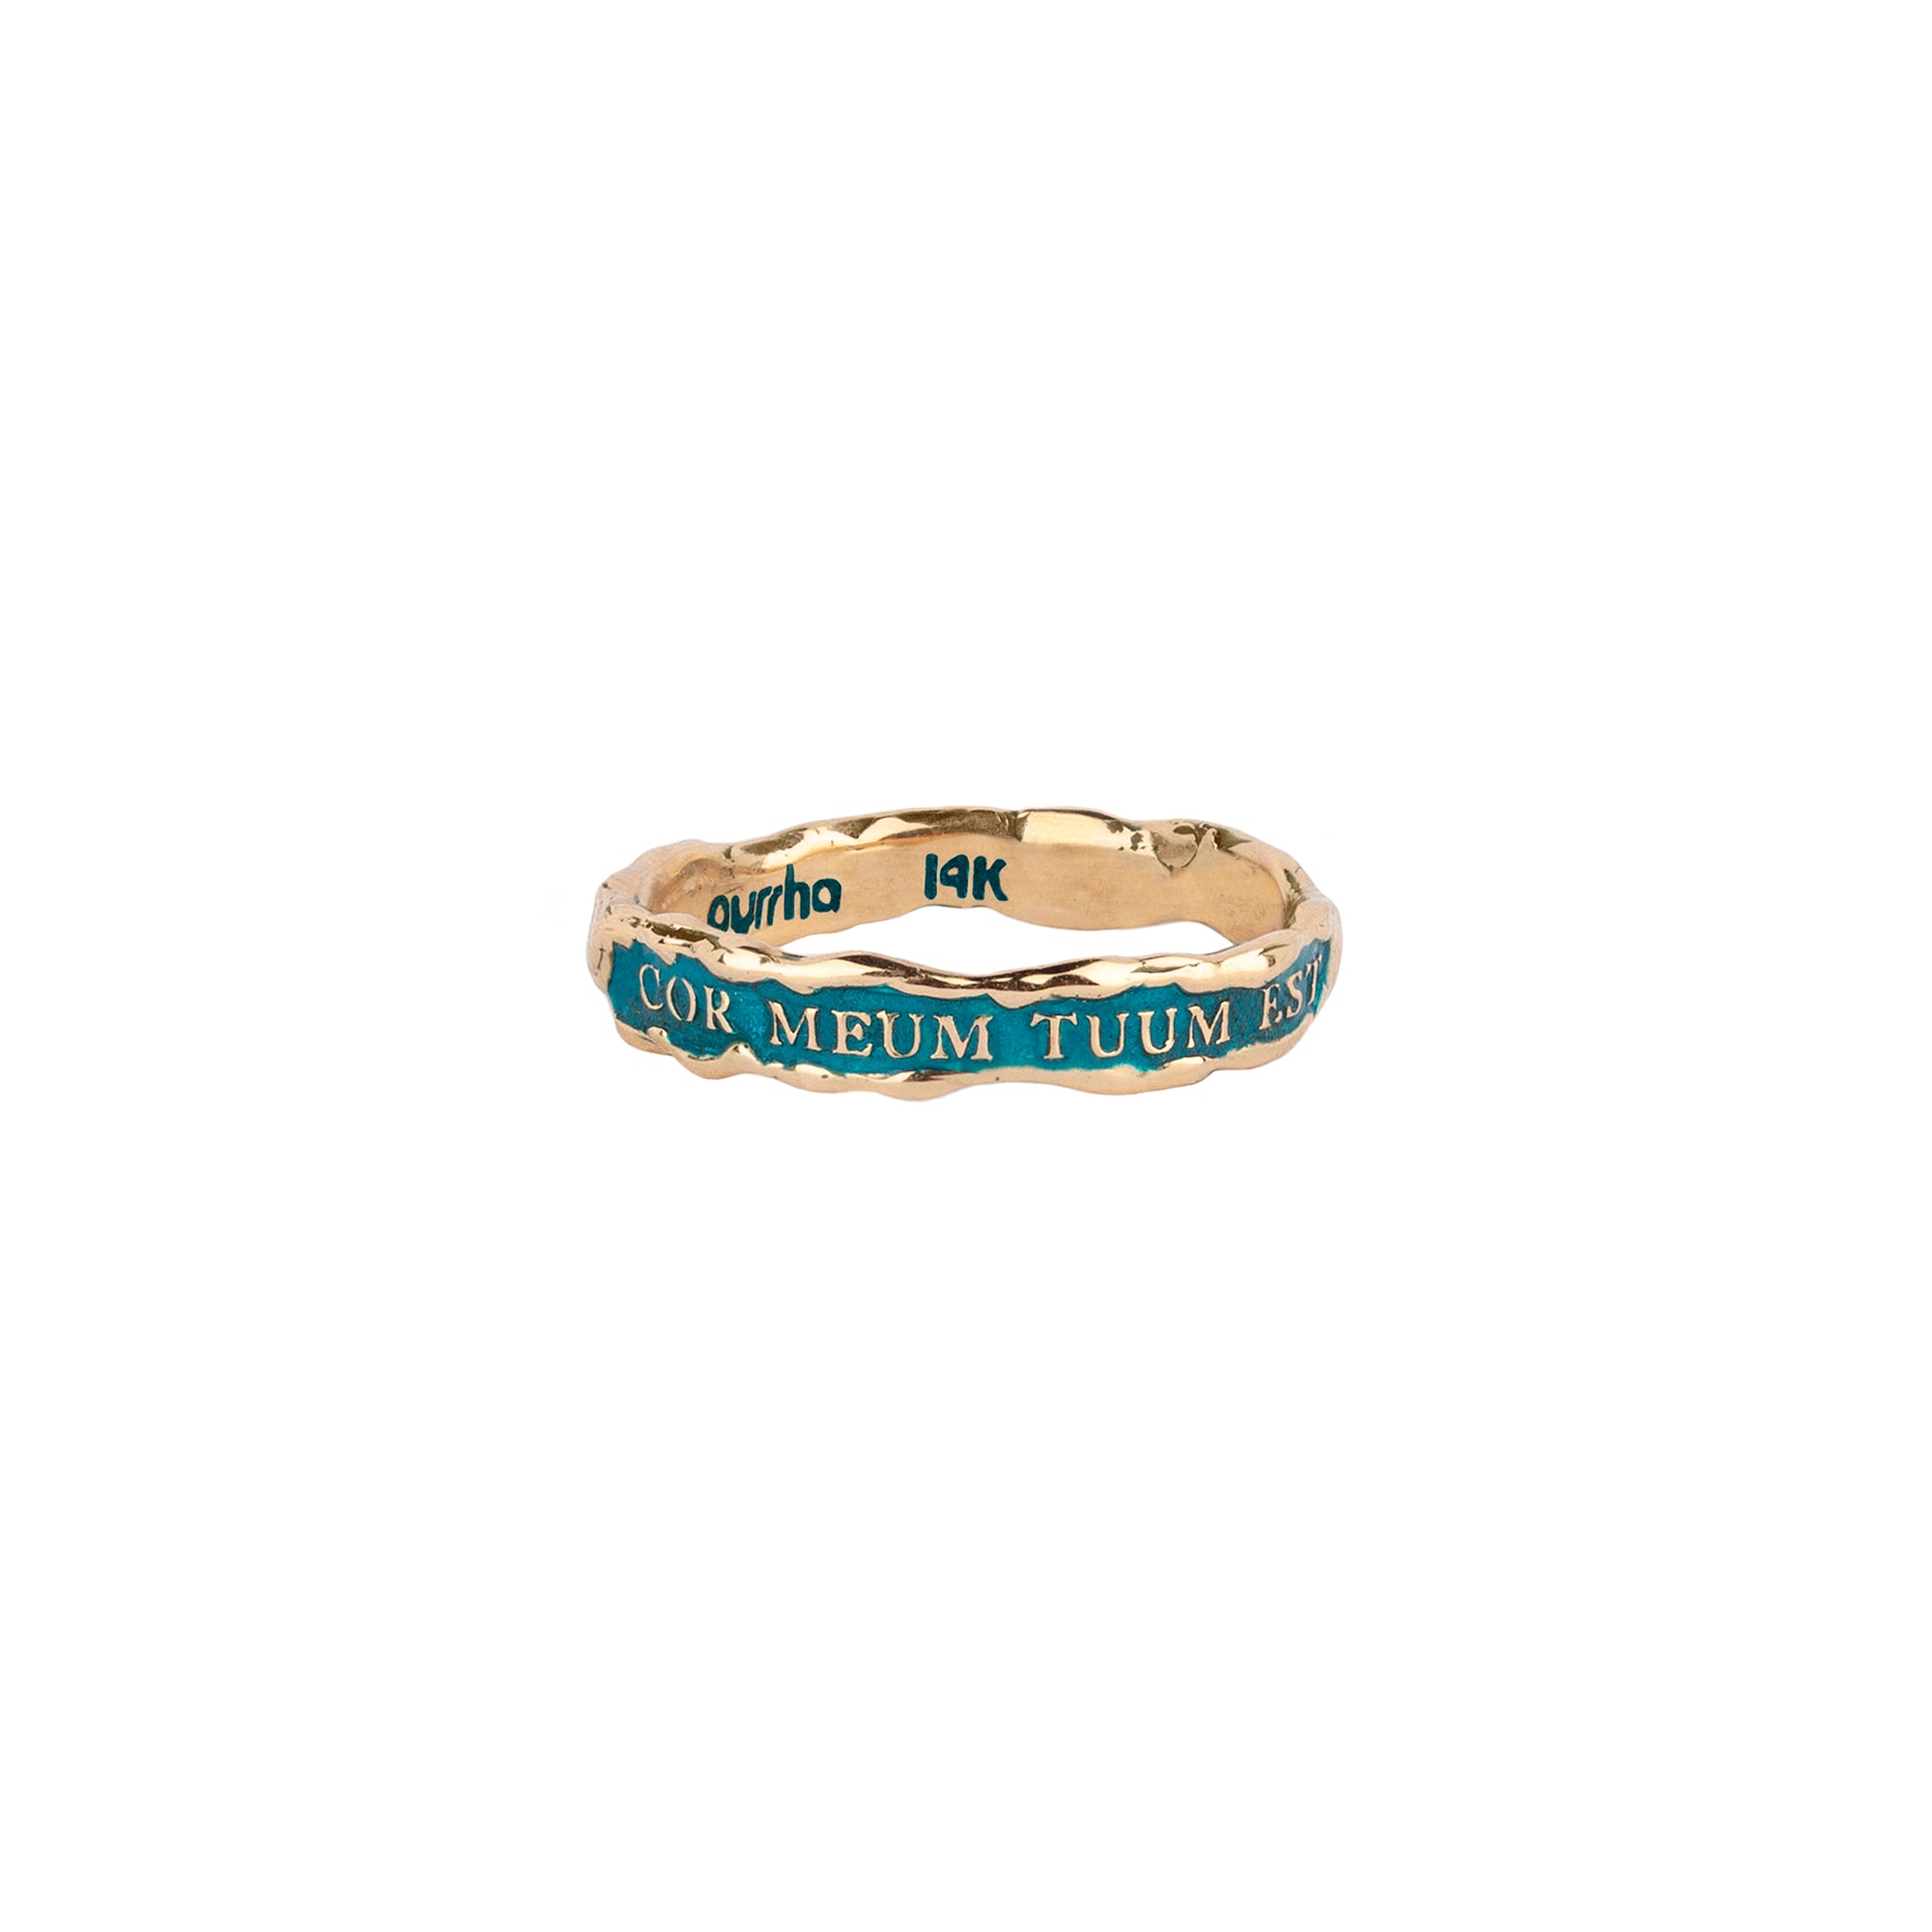 My Heart Is Yours 14K Gold Narrow Texture Band Ring - True Colors